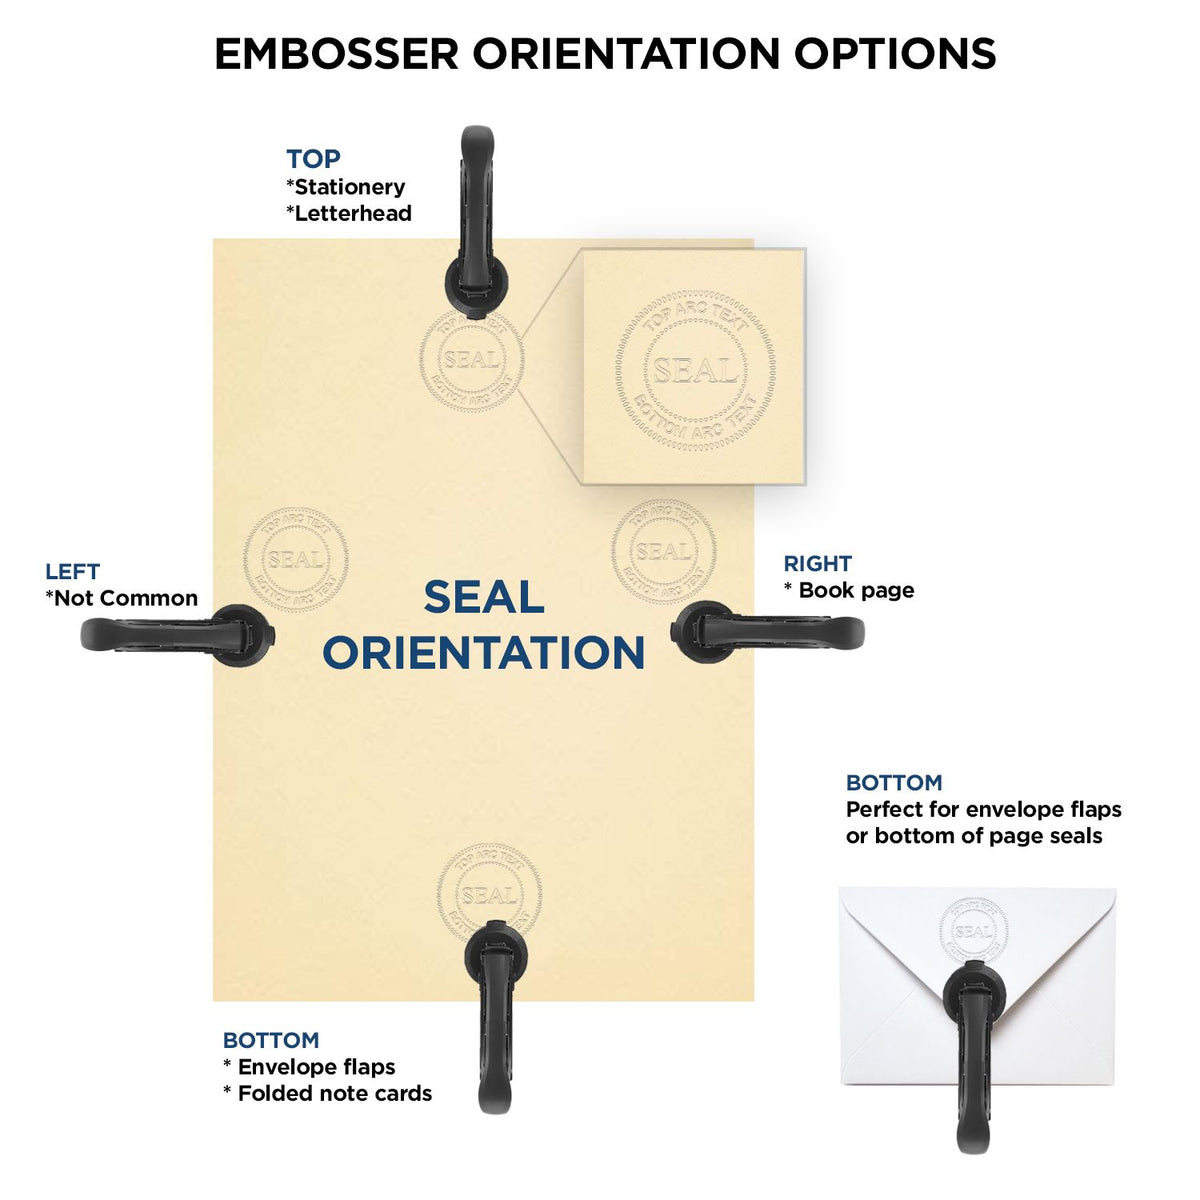 An infographic for the Handheld Nevada Professional Geologist Embosser showing embosser orientation, this is showing examples of a top, bottom, right and left insert.